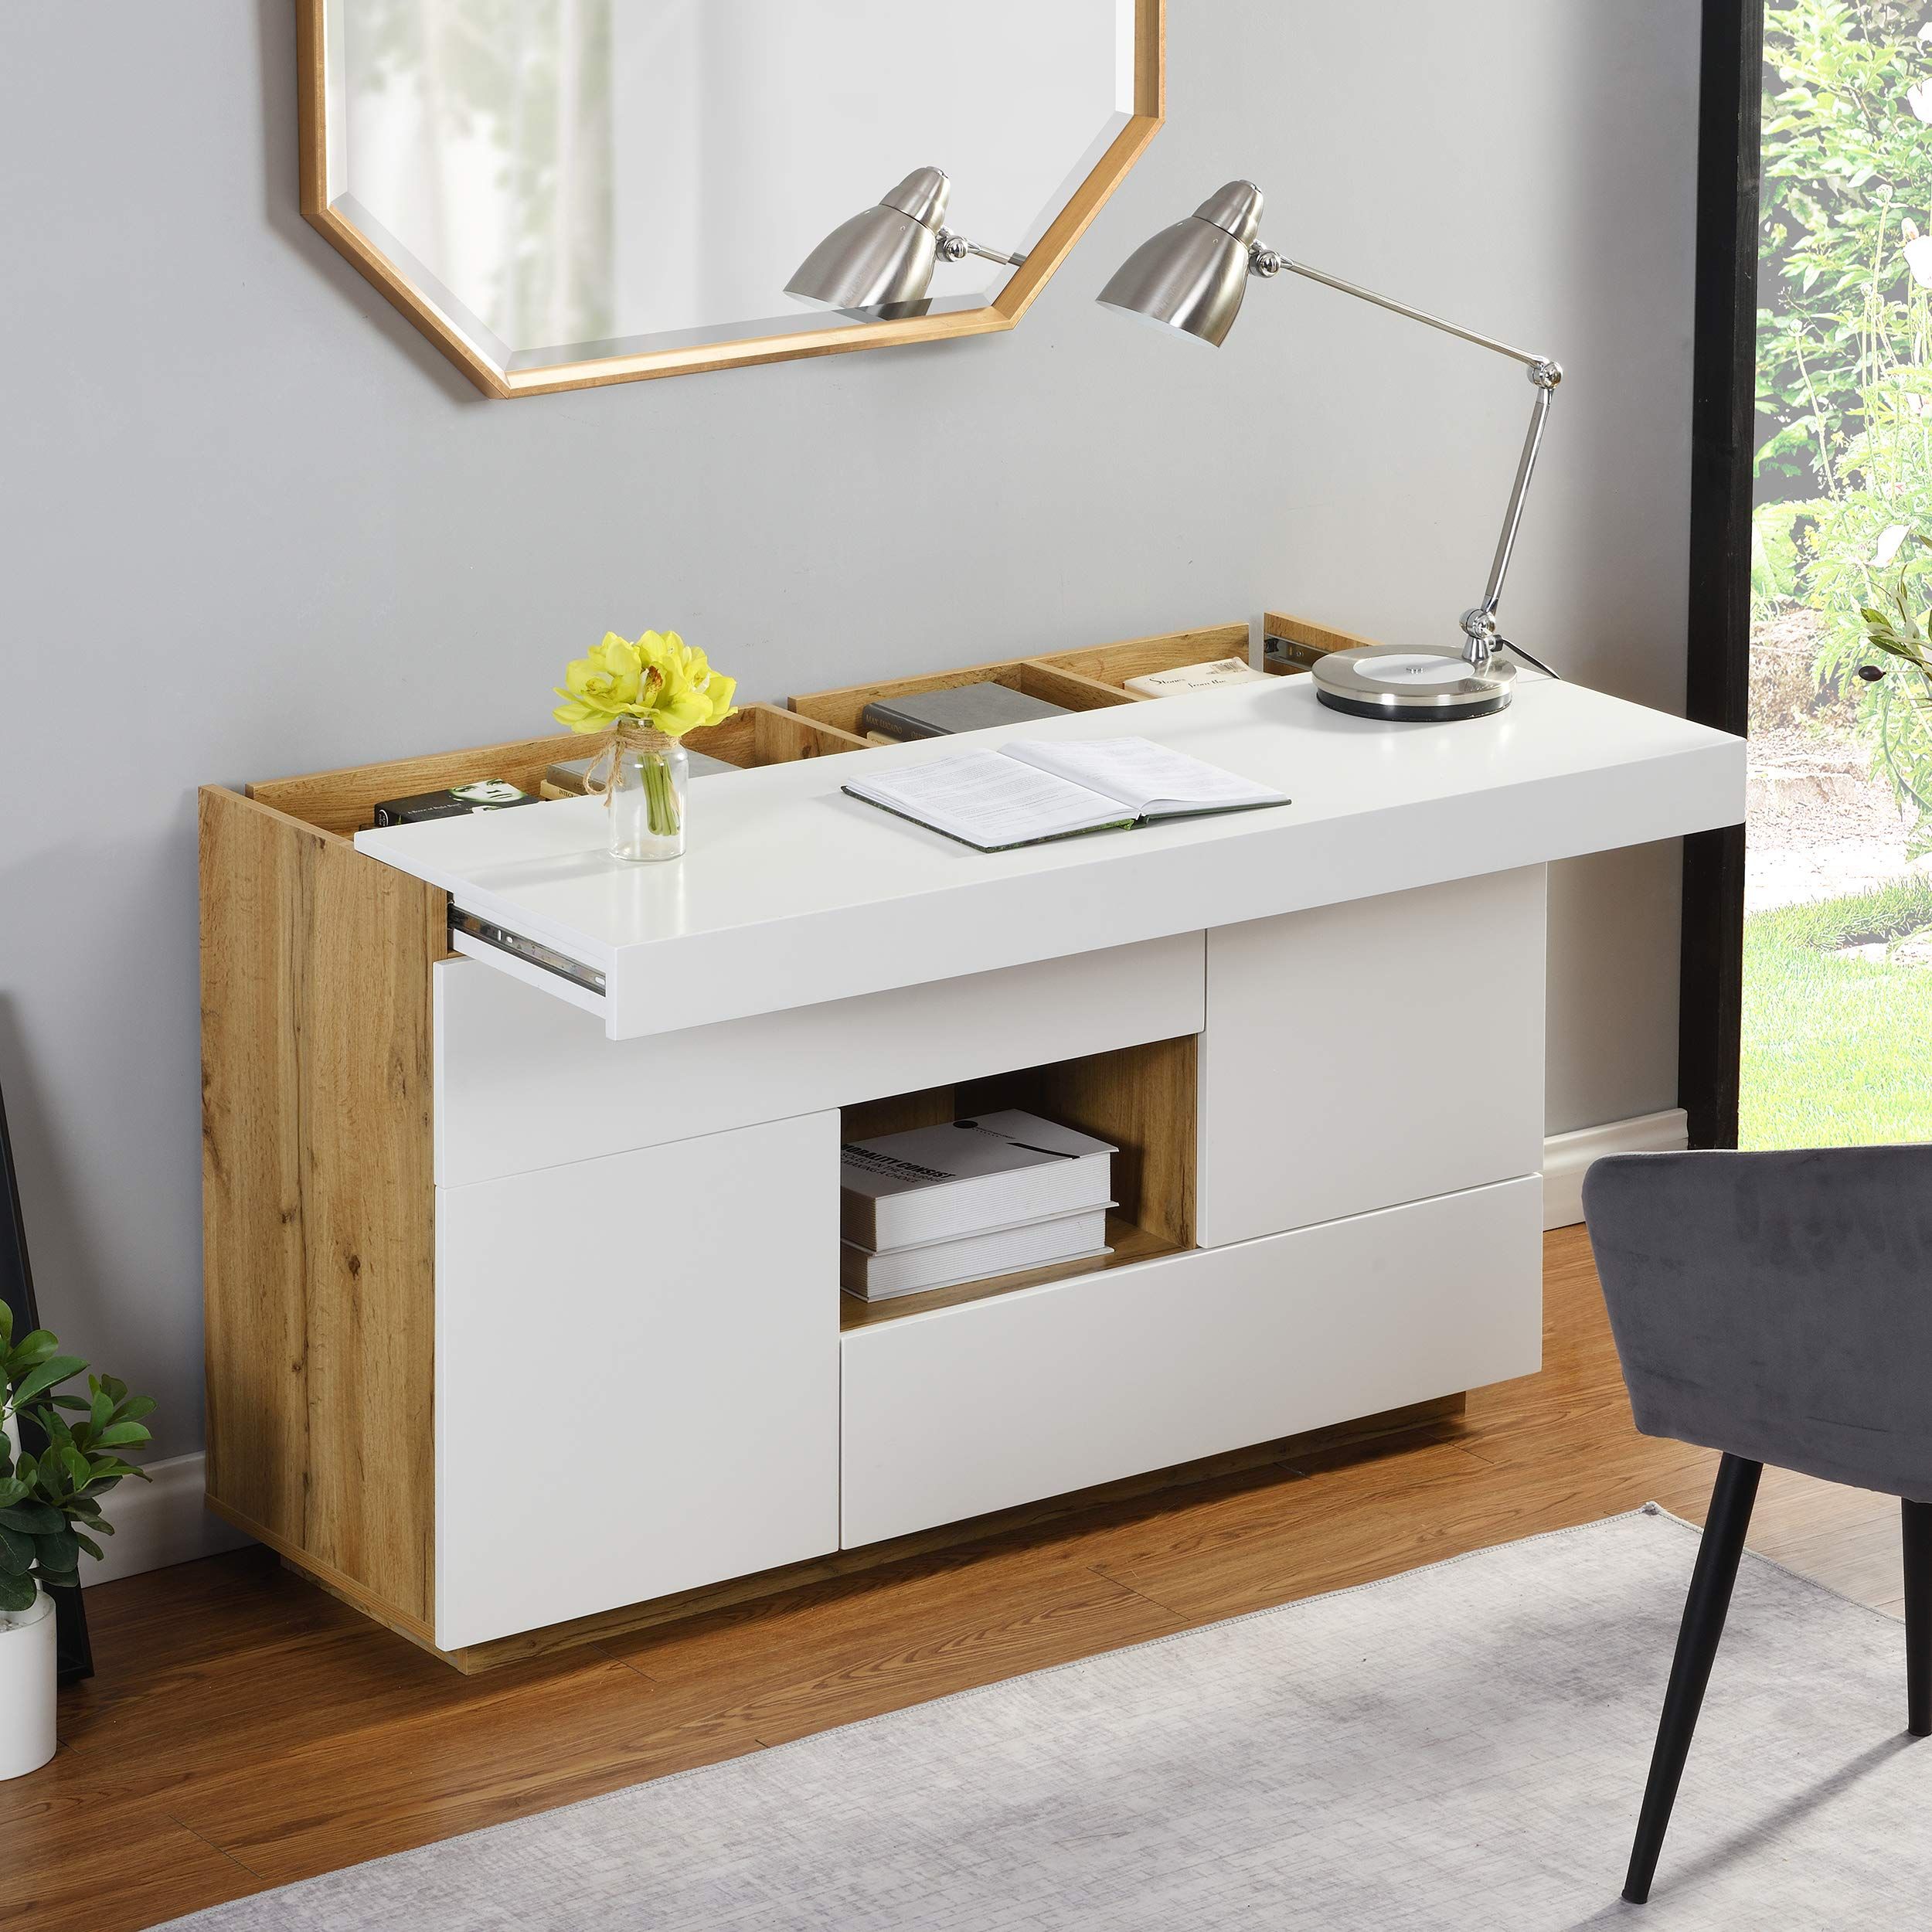 Select the white gloss furniture to  enhance your home’s look